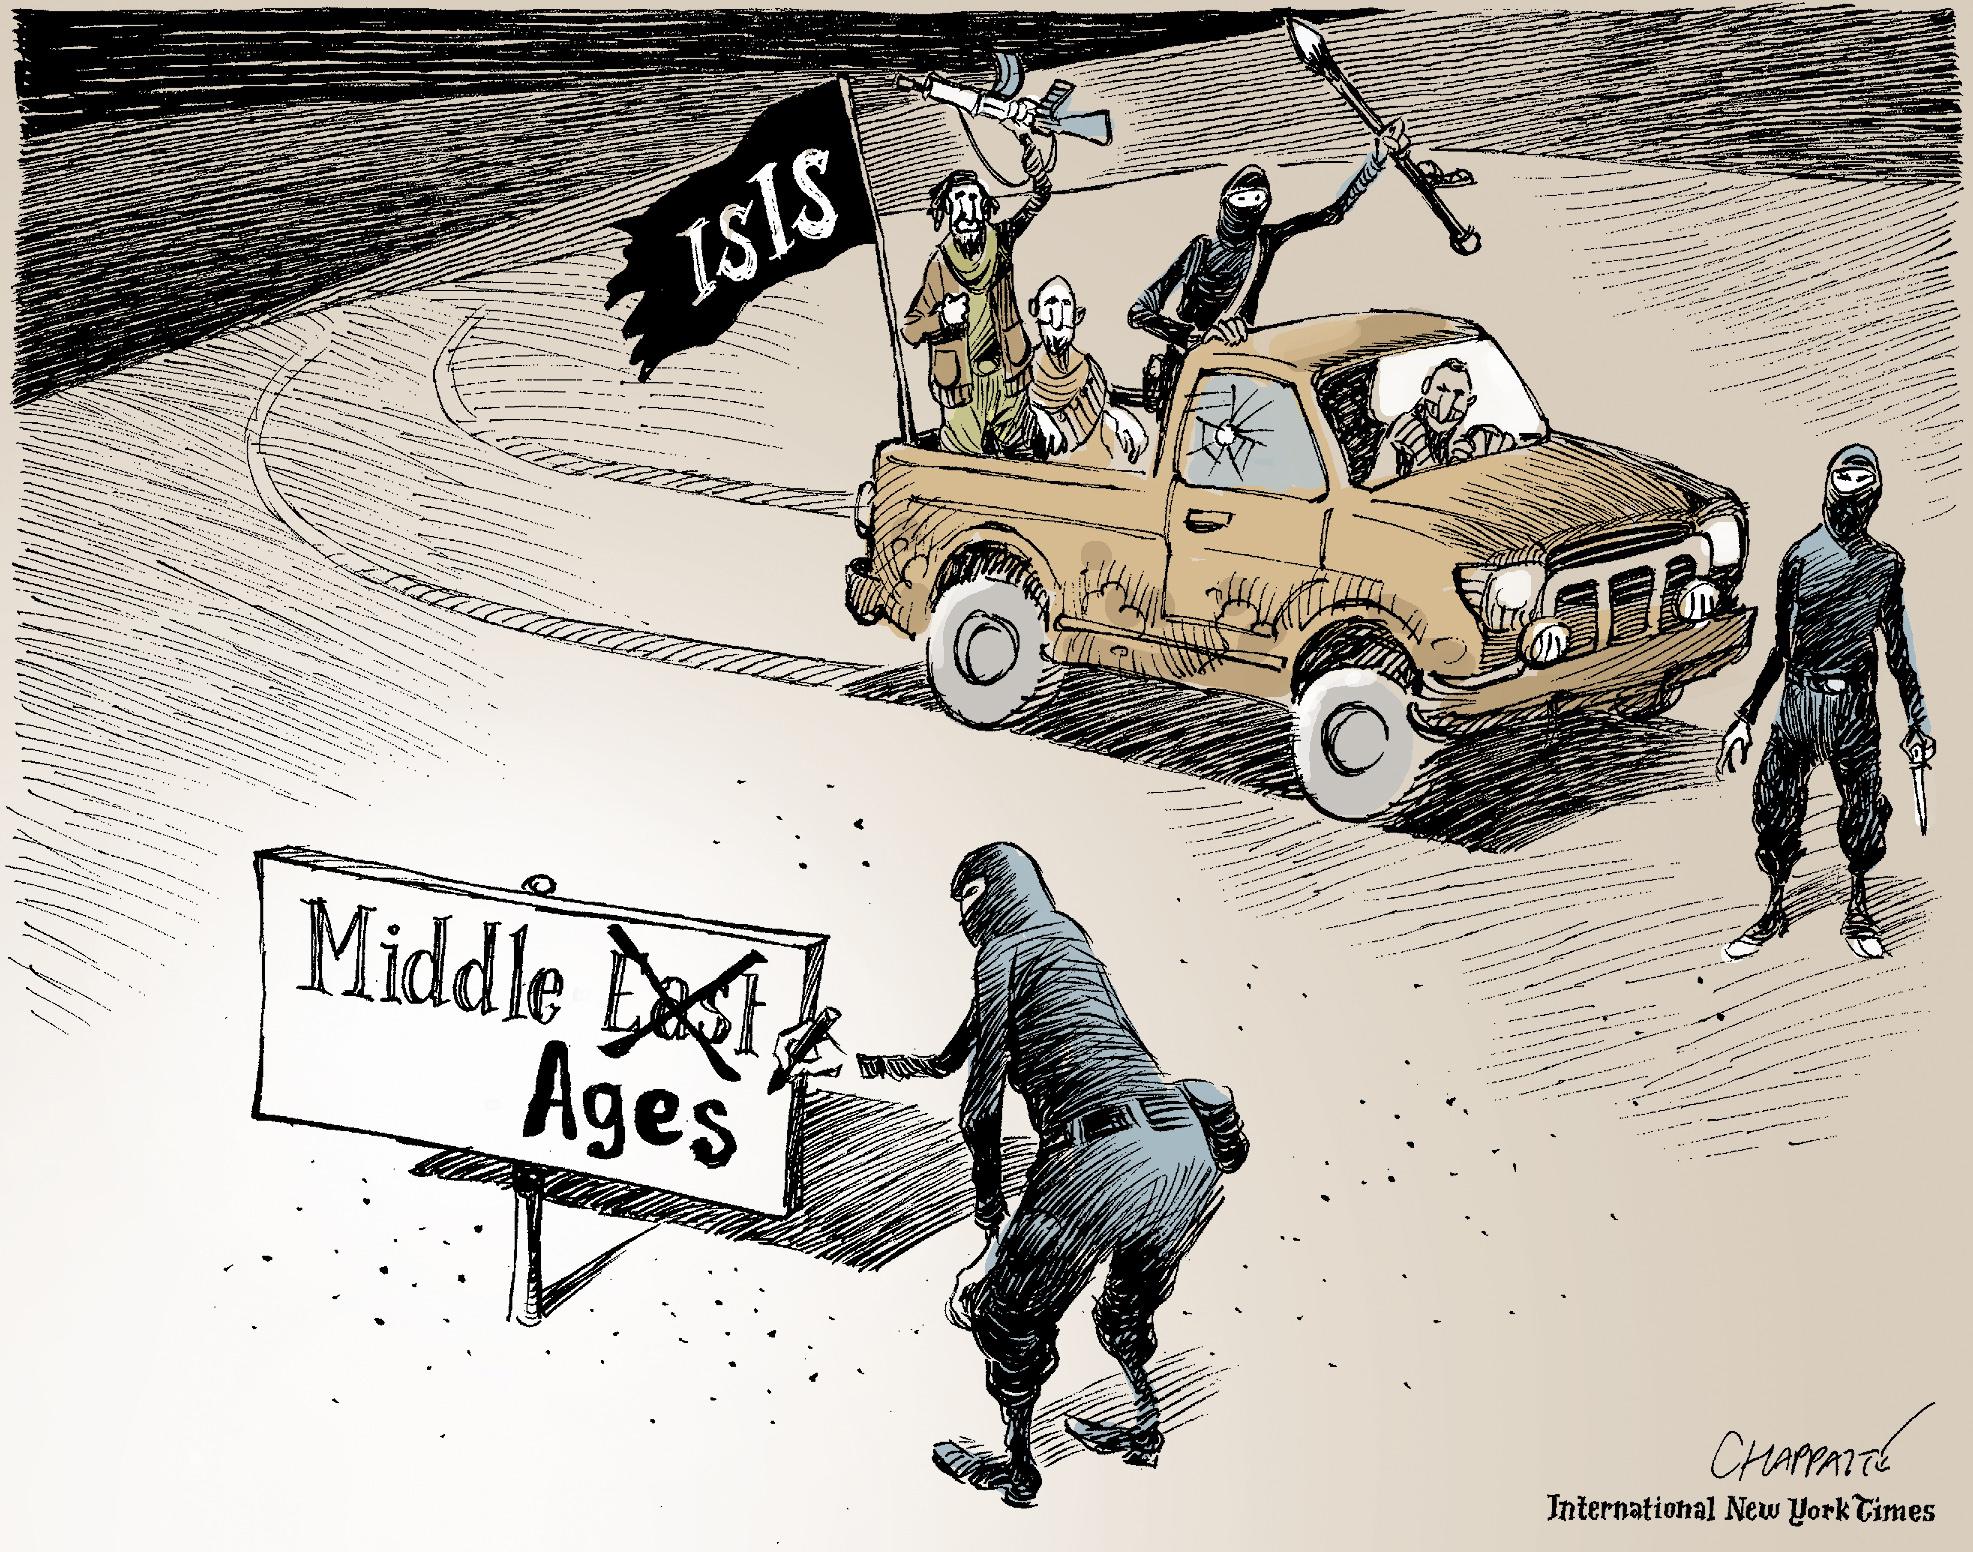 A changed Middle East